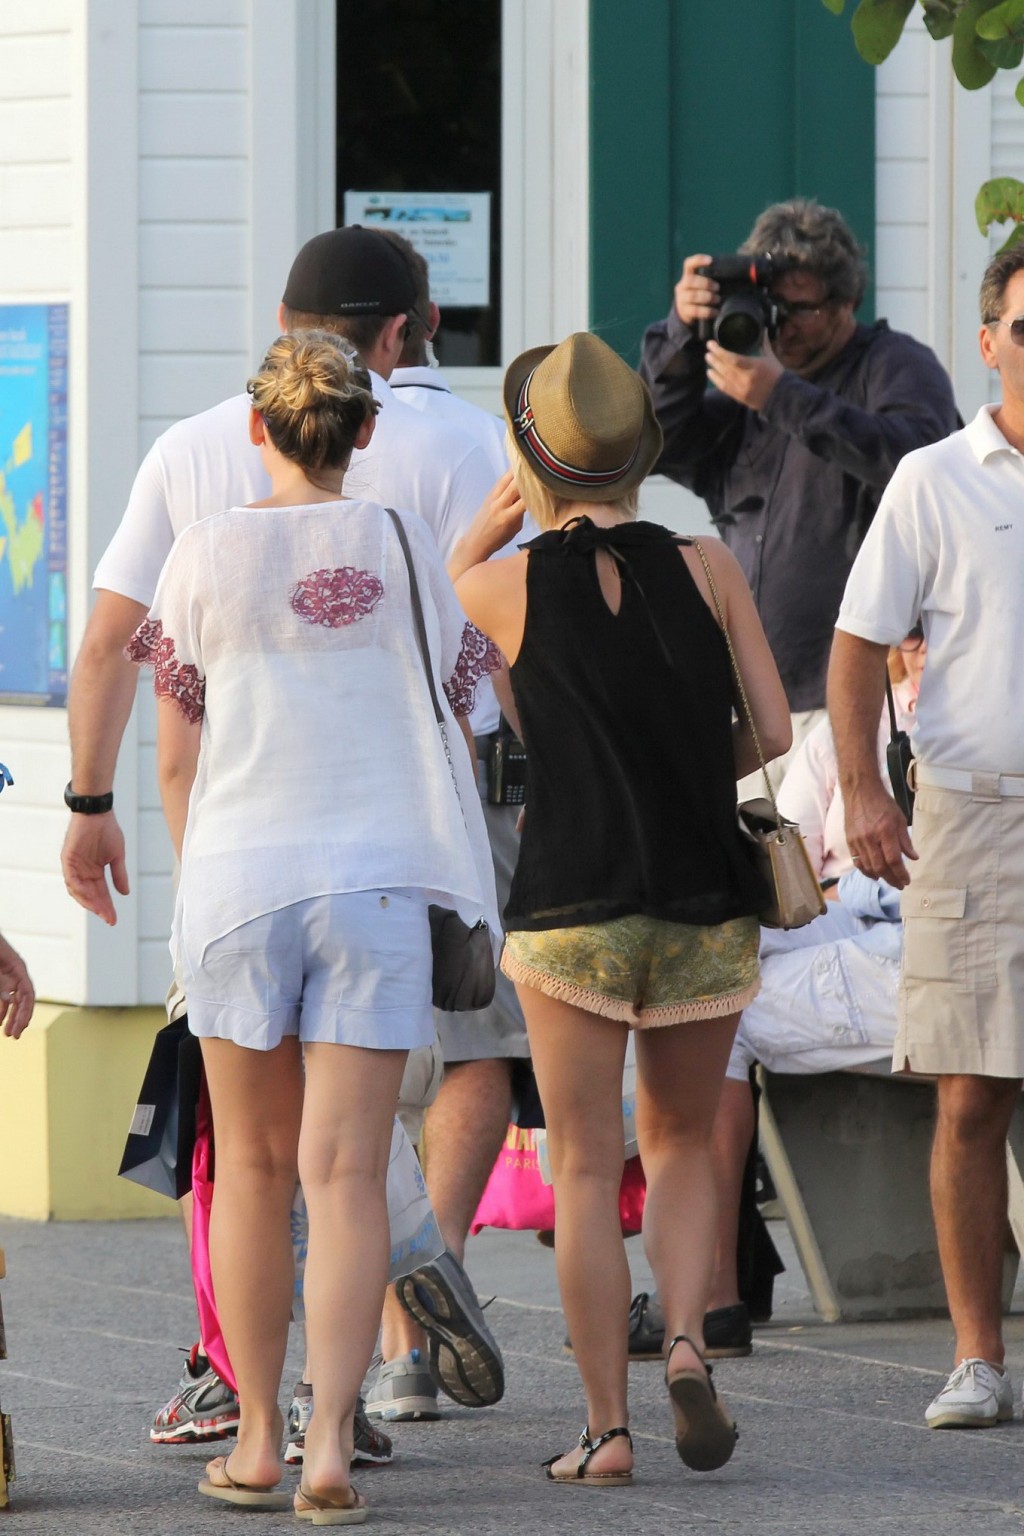 Julianne Hough wearing skimpy shorts  overall top while on vacation in St Barts #75244623